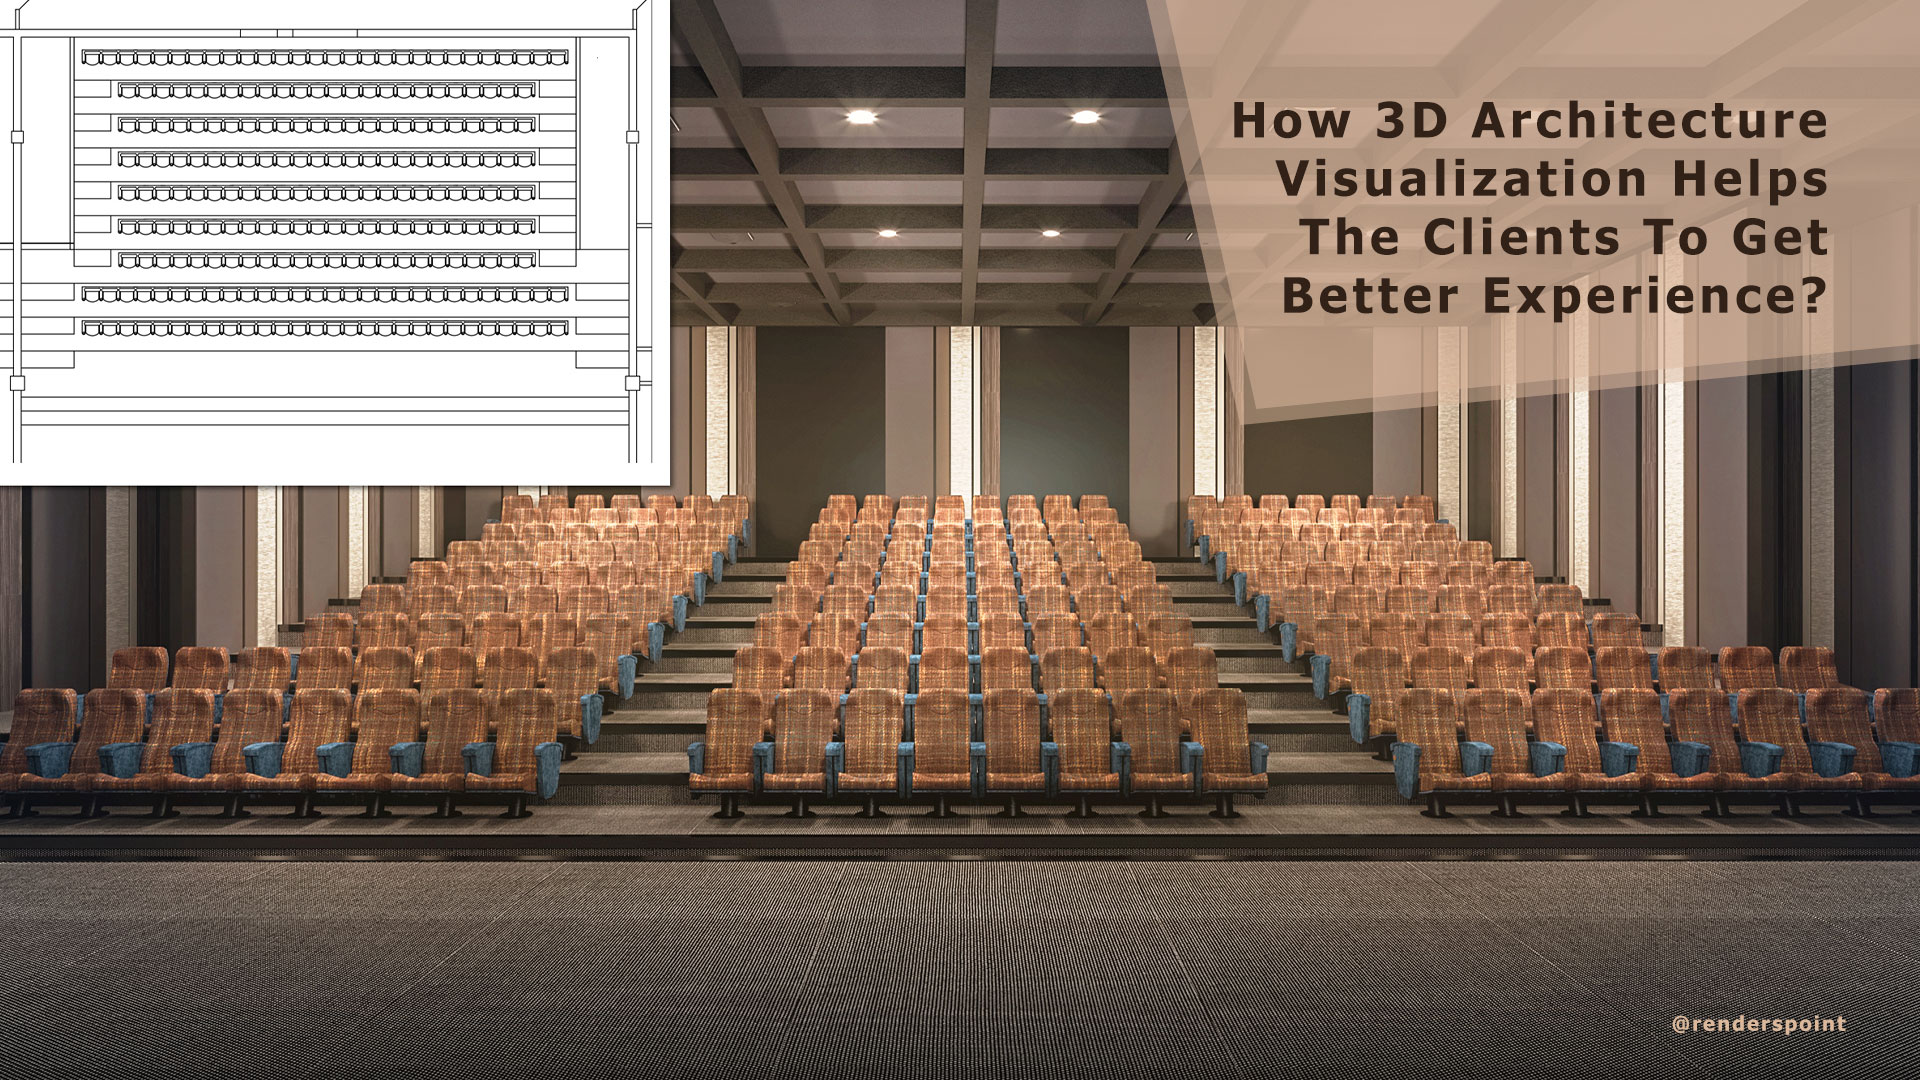 How 3D Architecture Visualization Helps the Clients to get better experience?